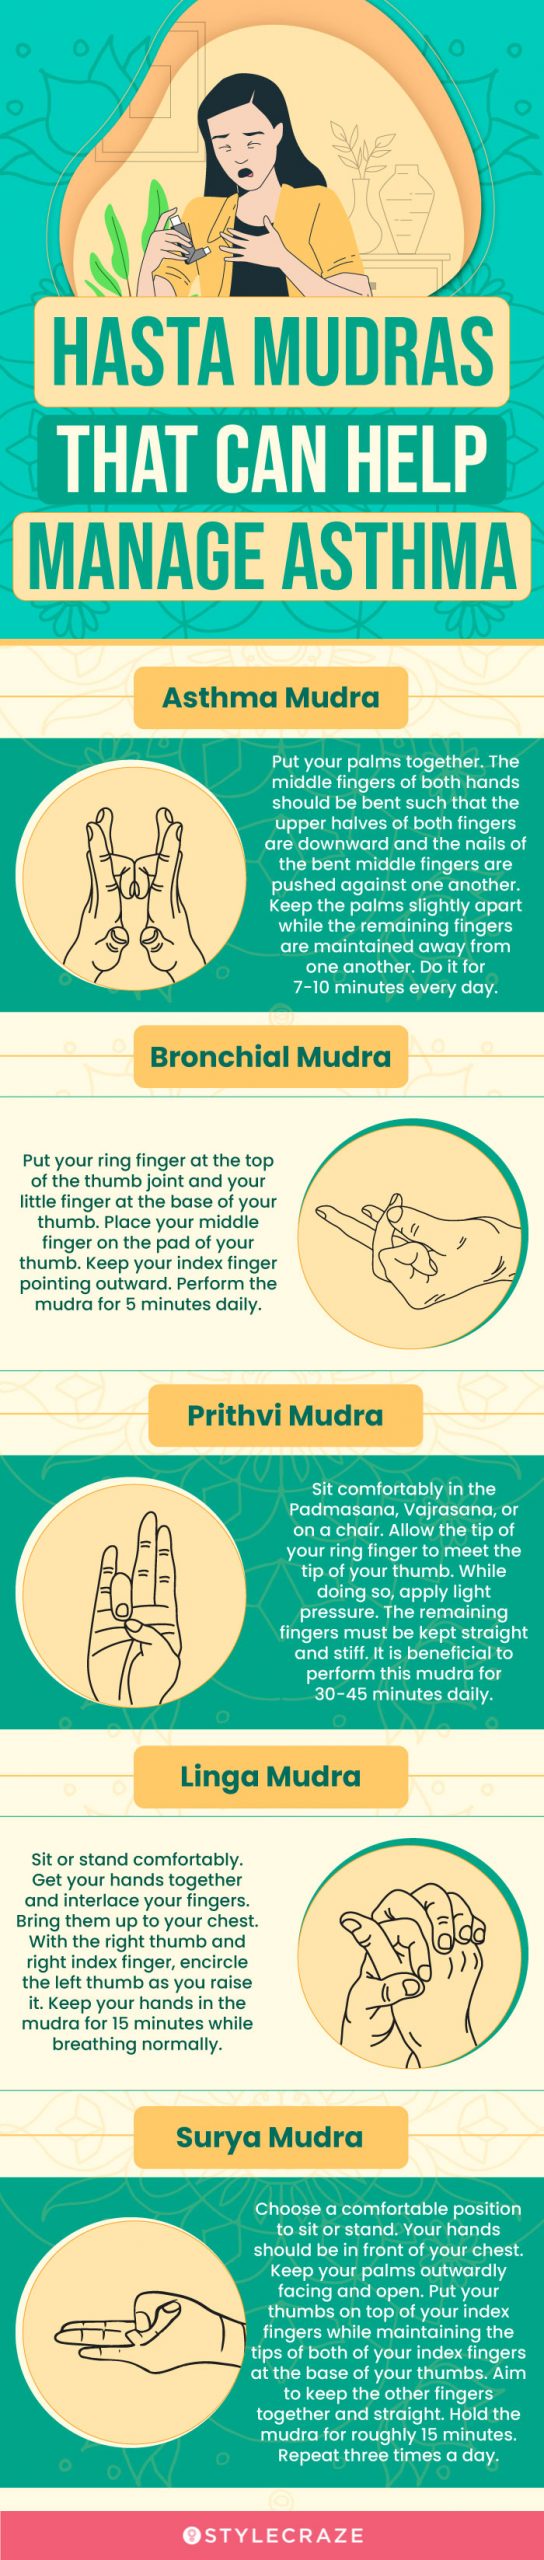 hasta mudras that can help manage asthma (infographic)